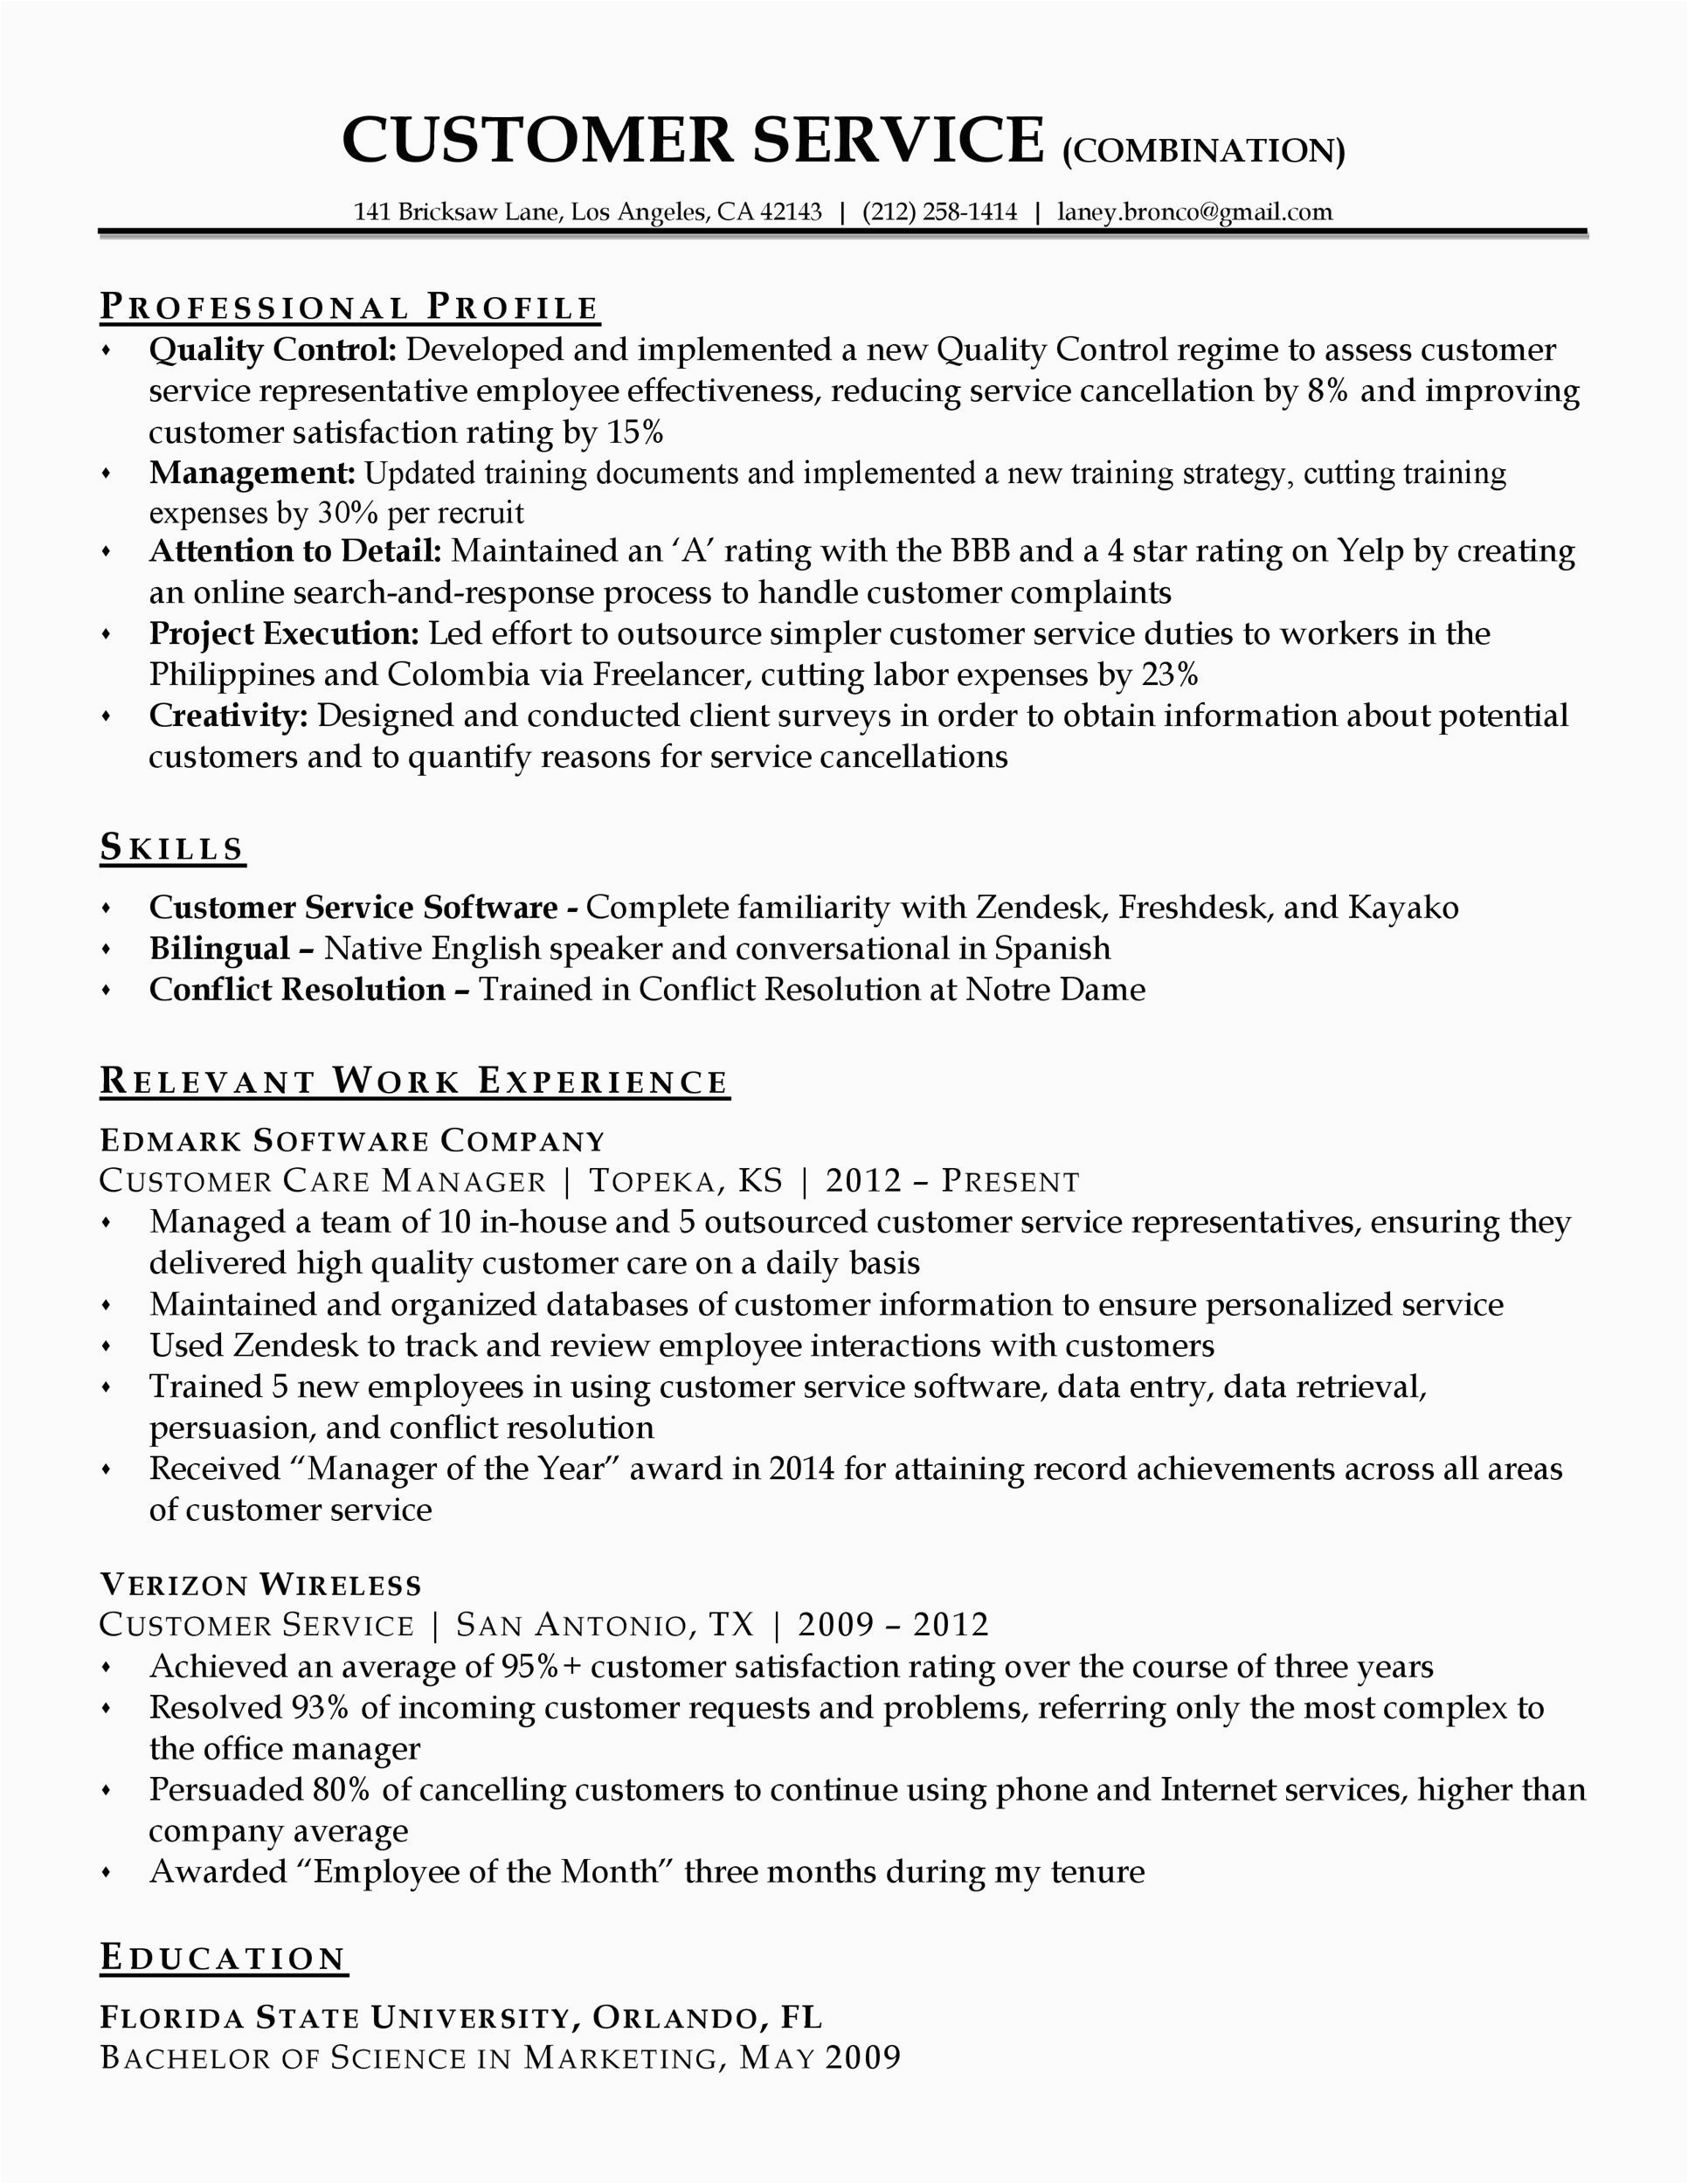 Free Resume Templates for Customer Service Jobs Customer Service Resume Samples 2012 Customer Service